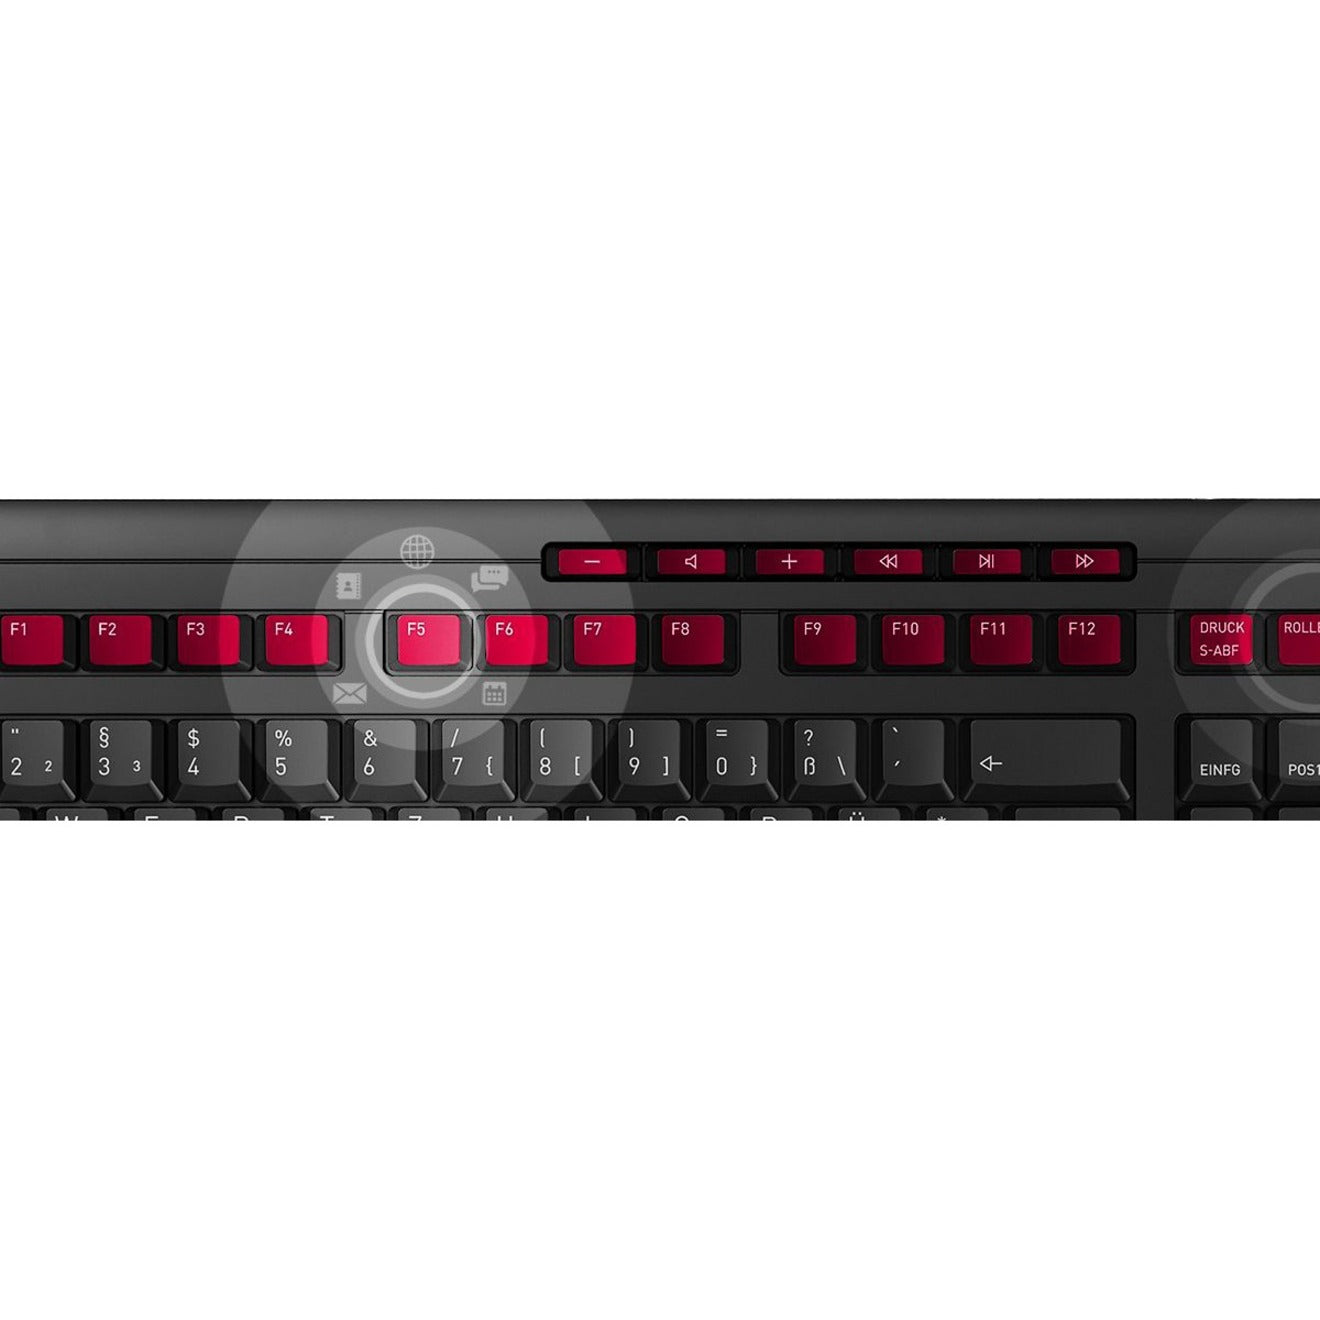 CHERRY JD-0410EU-2 B.UNLIMITED 3.0 Wireless Keyboard and Mouse, Rechargeable Battery, 2.4 GHz RF, Black